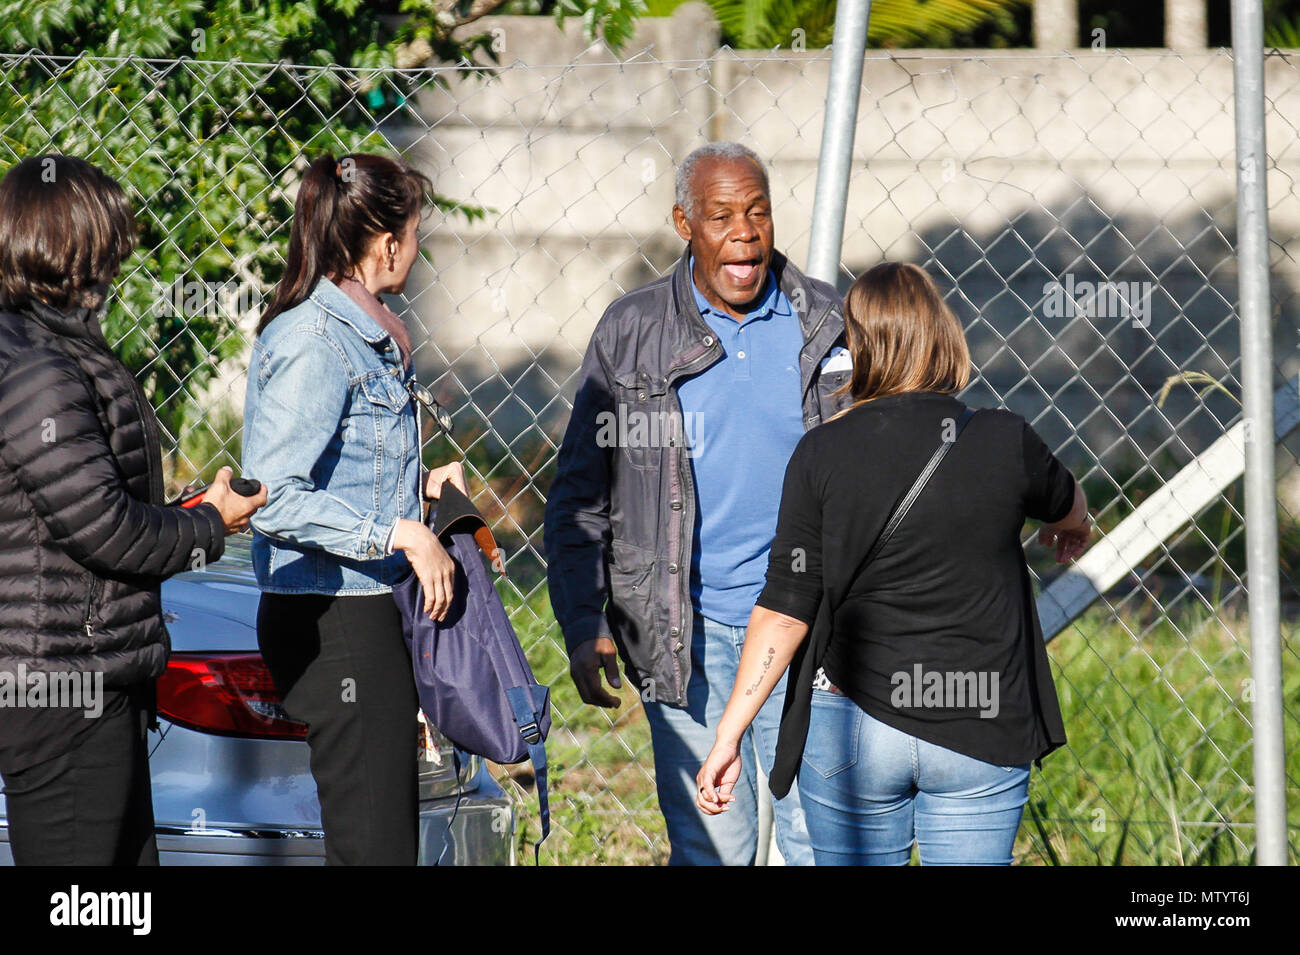 Curitiba, Brazil. May 31, 2018 - Curitiba, ParanÃ, Brasil - American actor Danny Glover visited the Federal Police Superintendent in Curitiba (Brazil), on Thursday afternoon (31), to provide support and solidarity to Lula. He was accompanied by former President Dilma Rousseff (PT) Foto: Geraldo Bubniak Credit: Geraldo Bubniak/ZUMA Wire/Alamy Live News Stock Photo